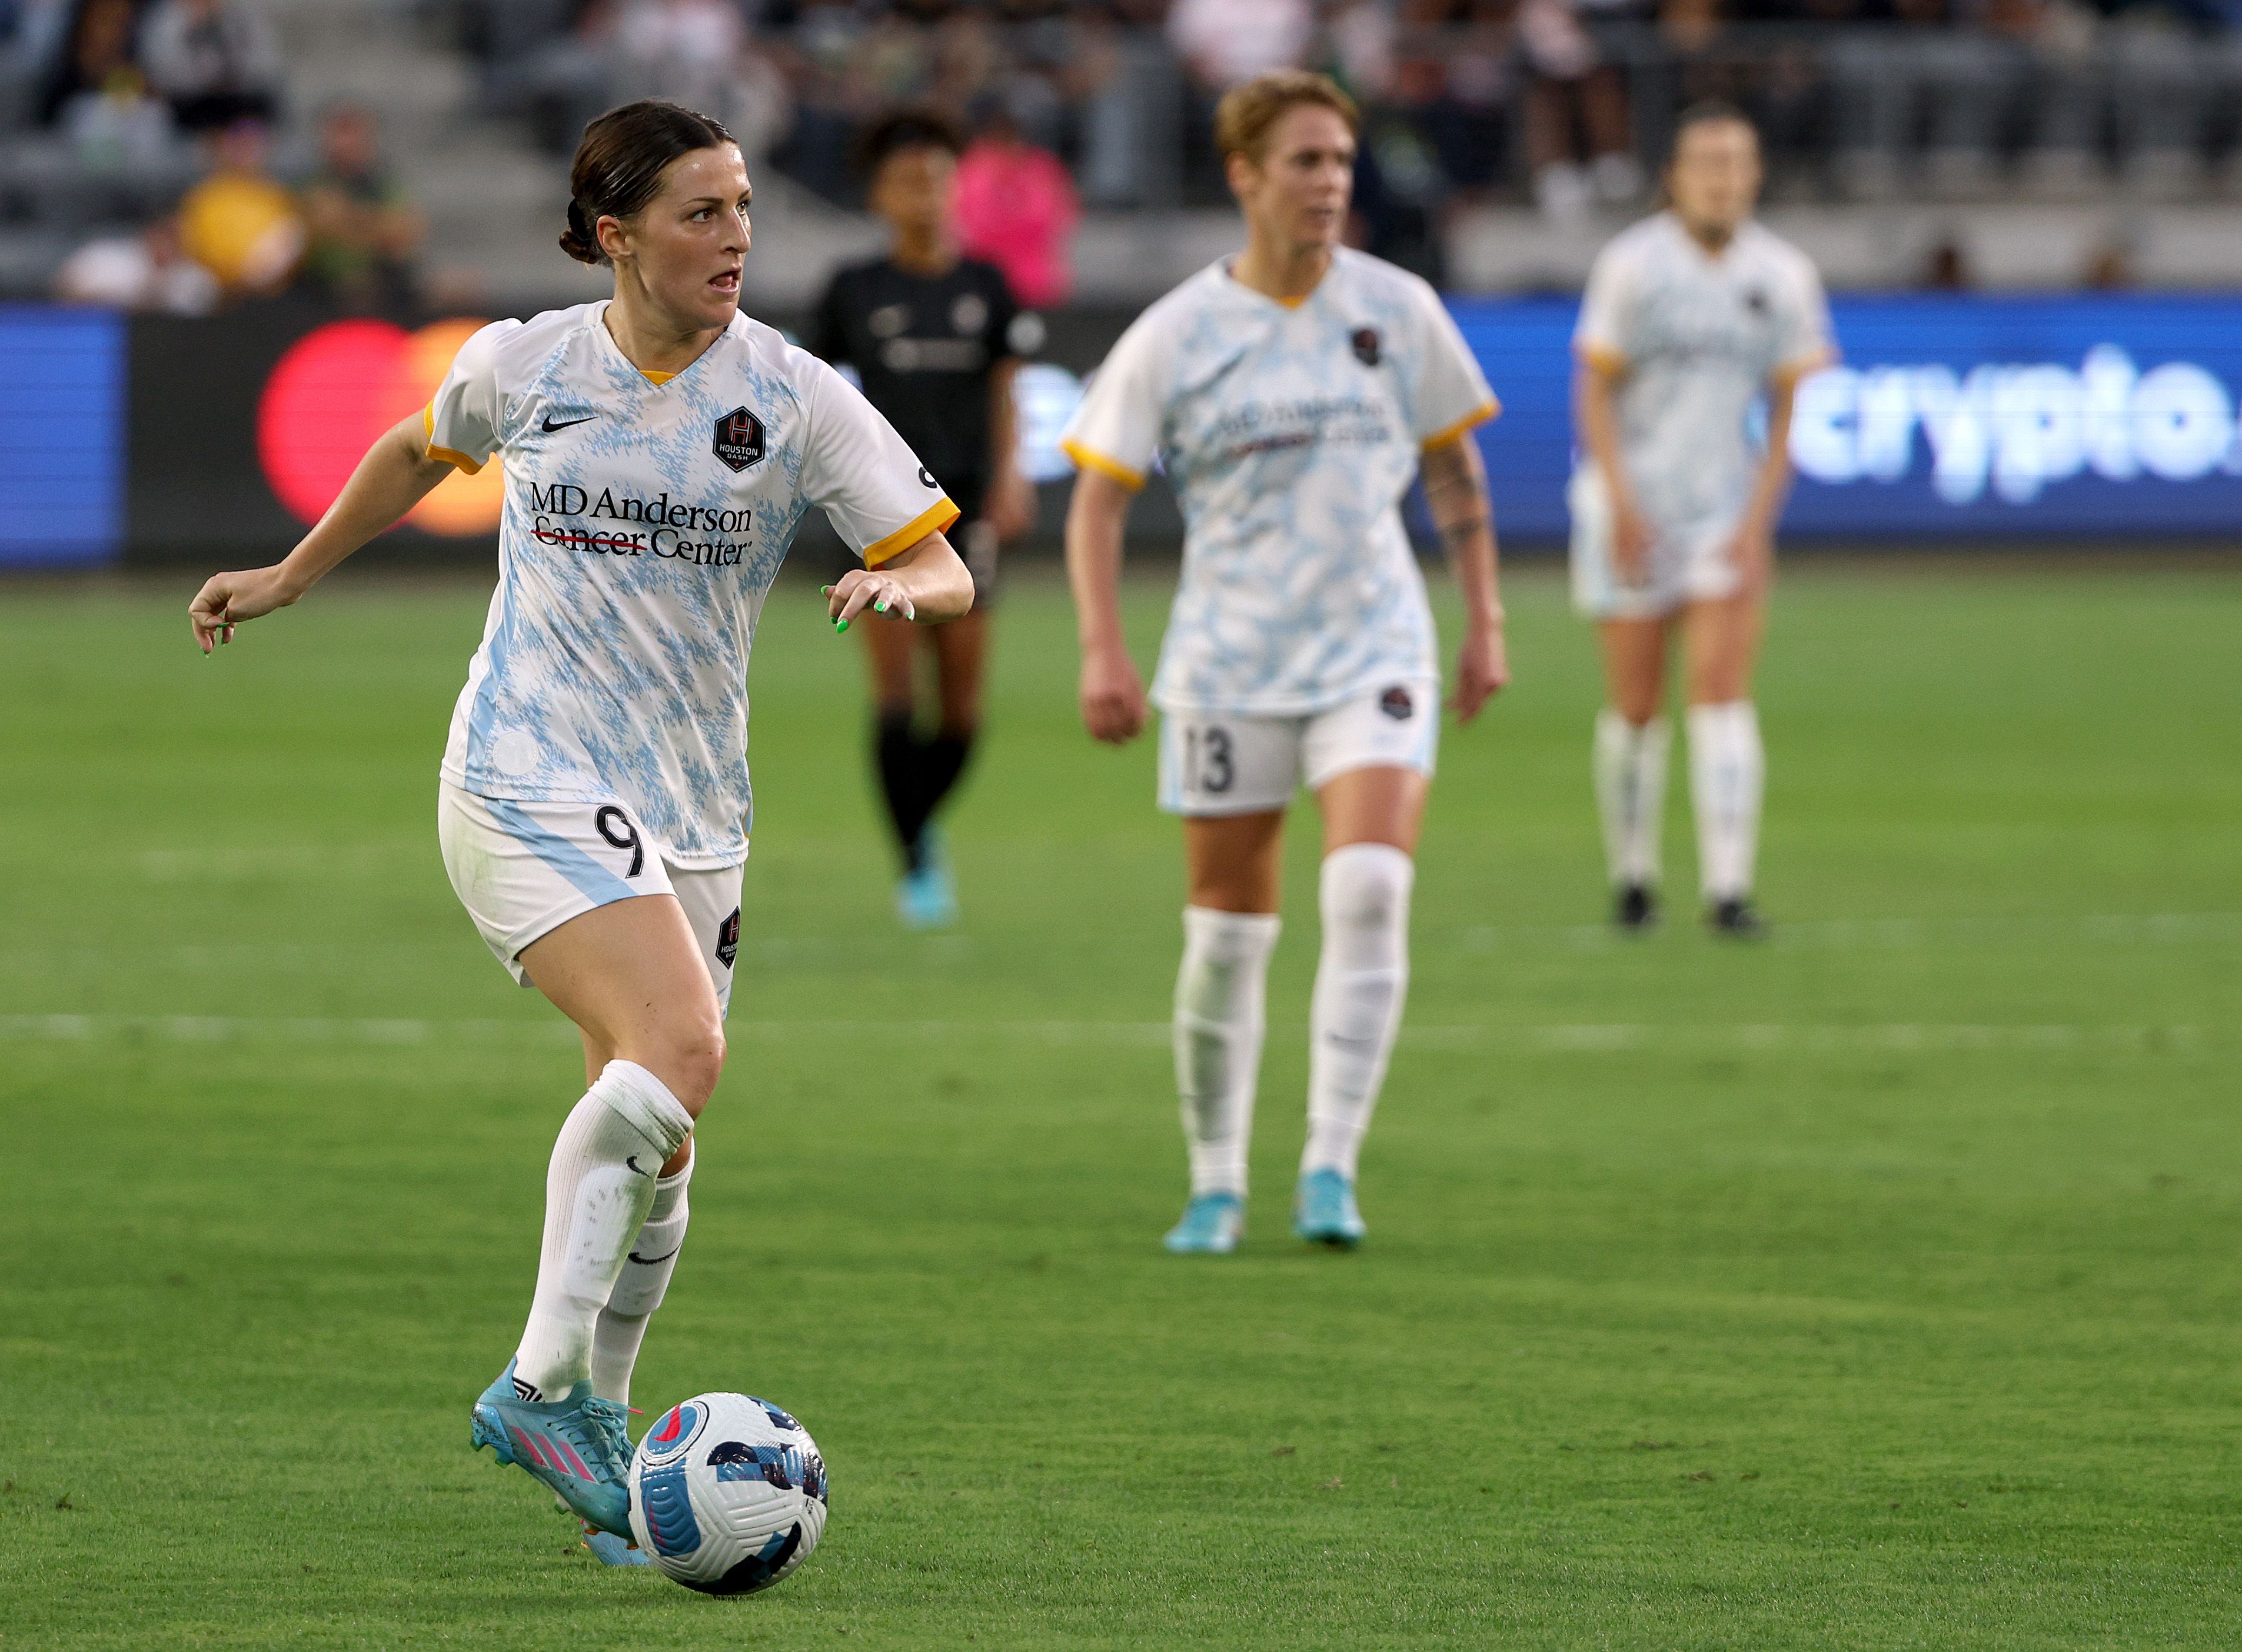 Houston Dash's Haley Hanson playing in the NWSL